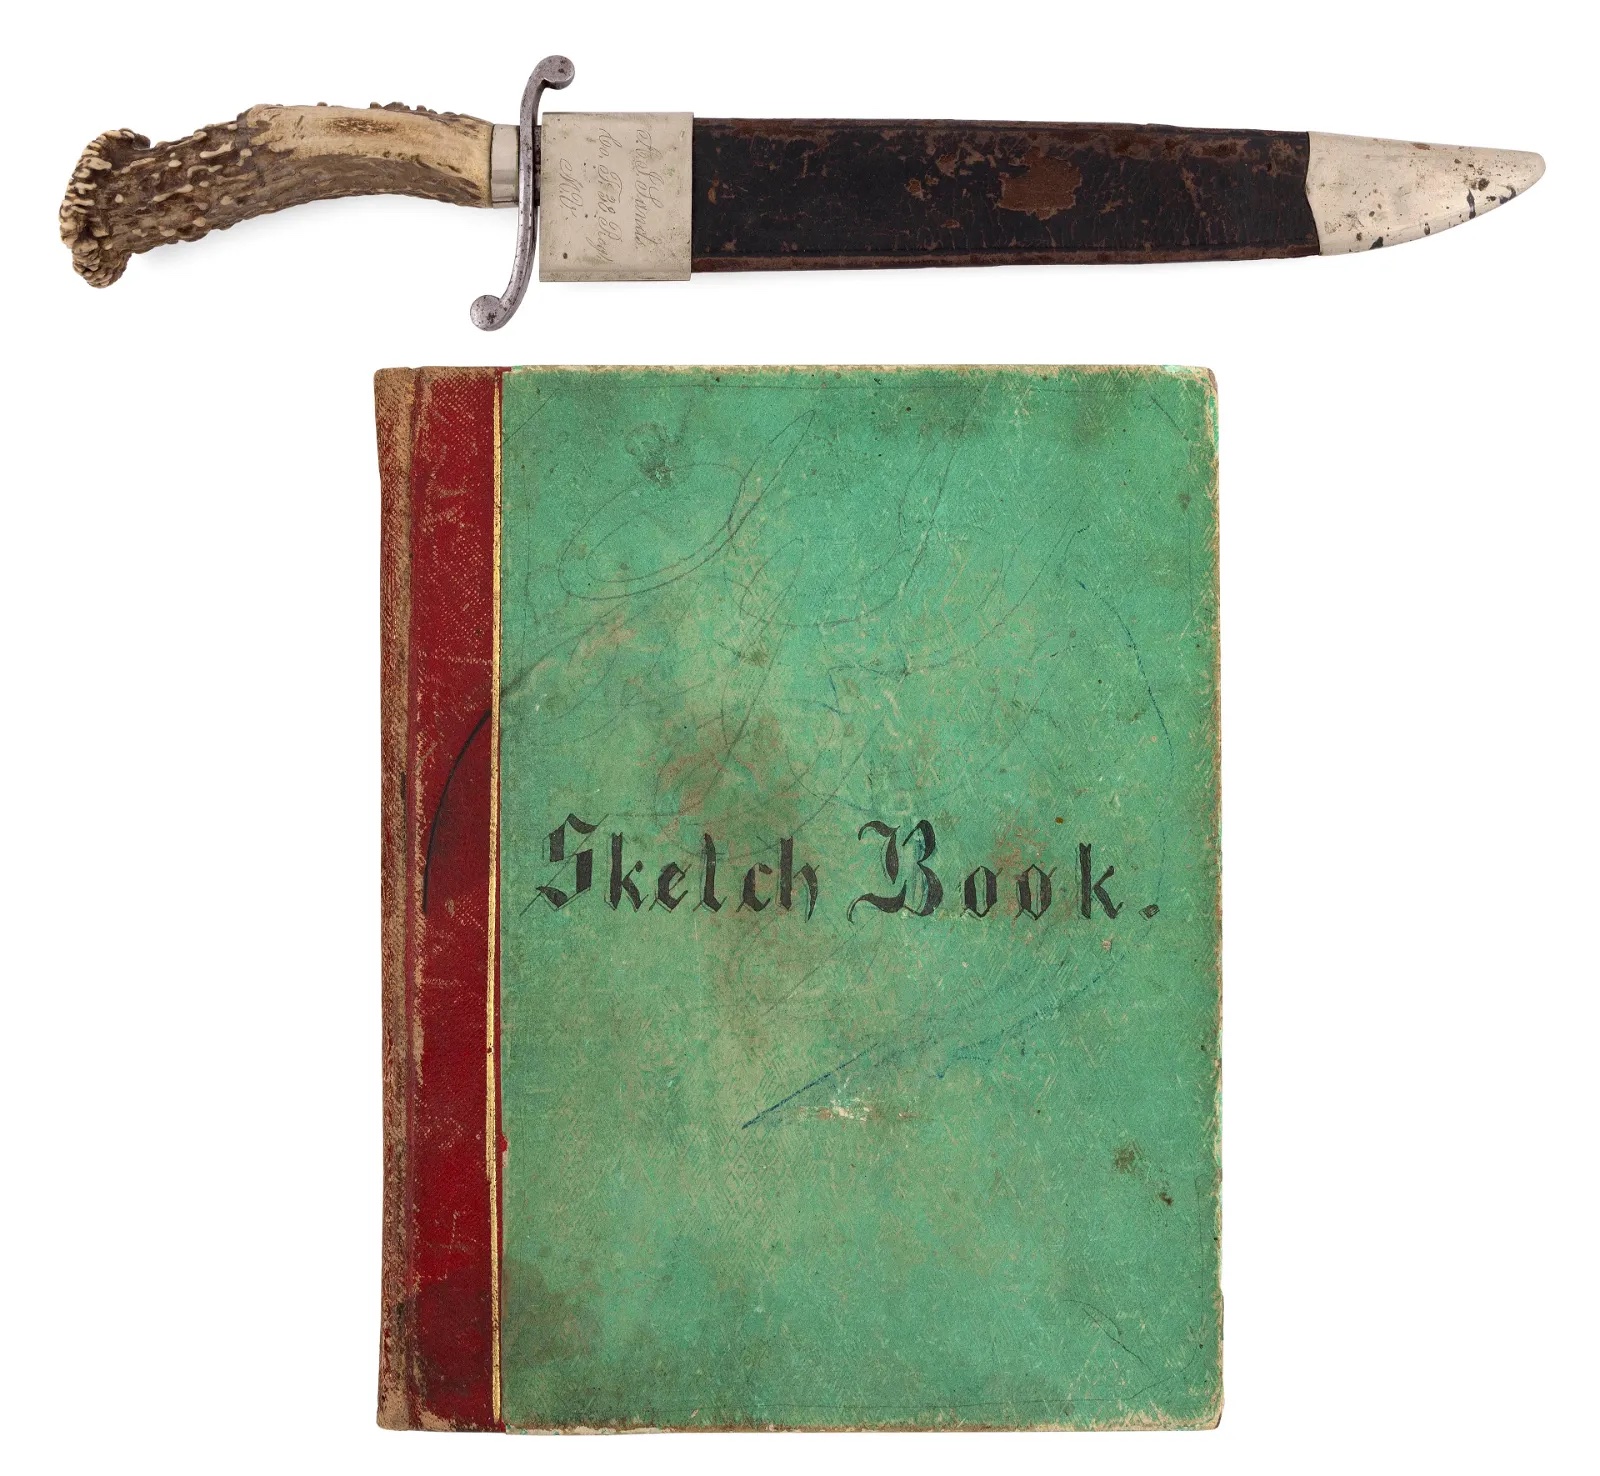 Hassam Brothers (Boston) Bowie knife and sketch book with Civil War illustrations, estimated at $12,000-$15,000 at Eldred's.